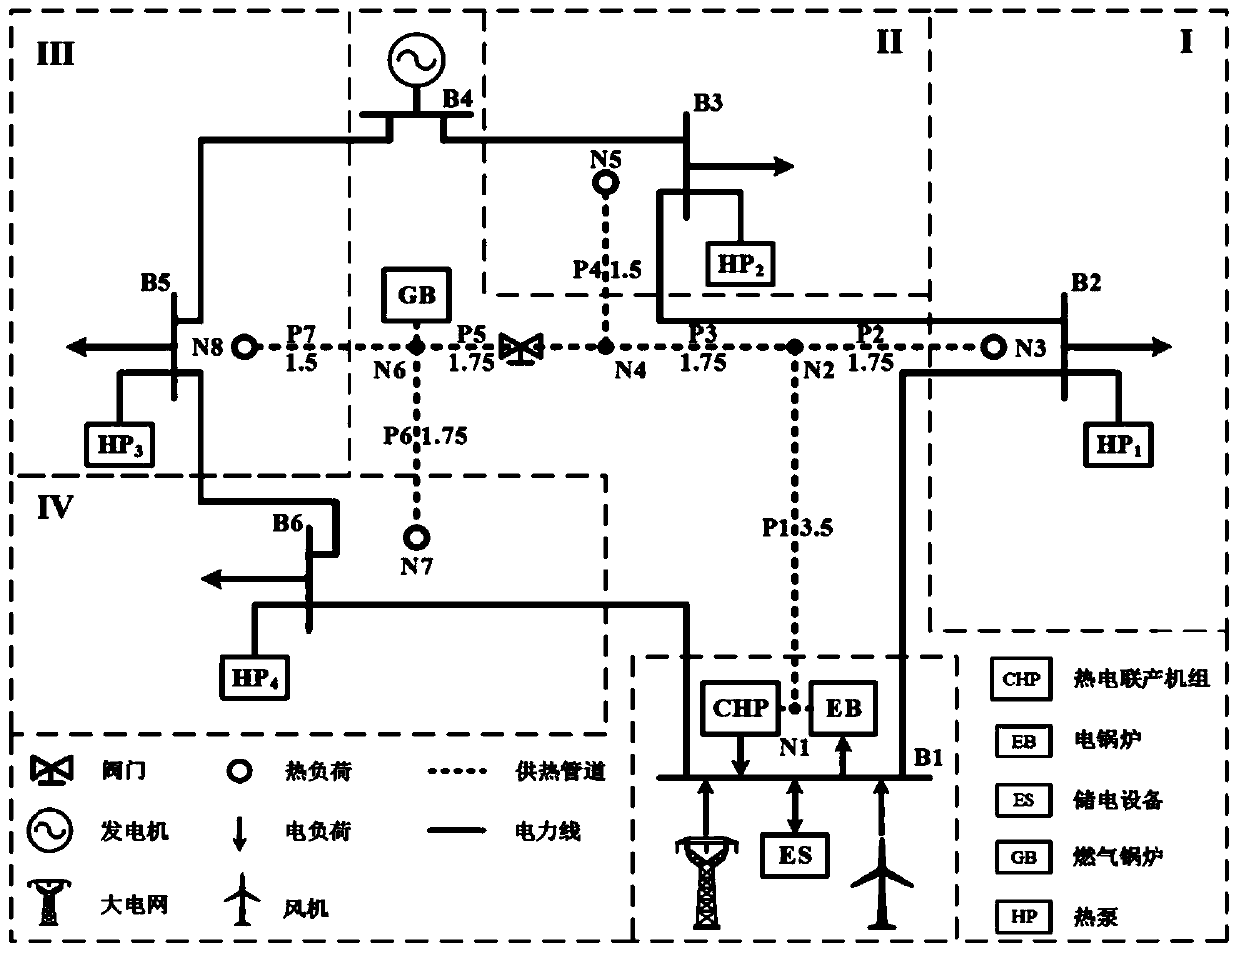 A combined heat and power generation system day-ahead scheduling method based on heat supply network partial differential equation constraint